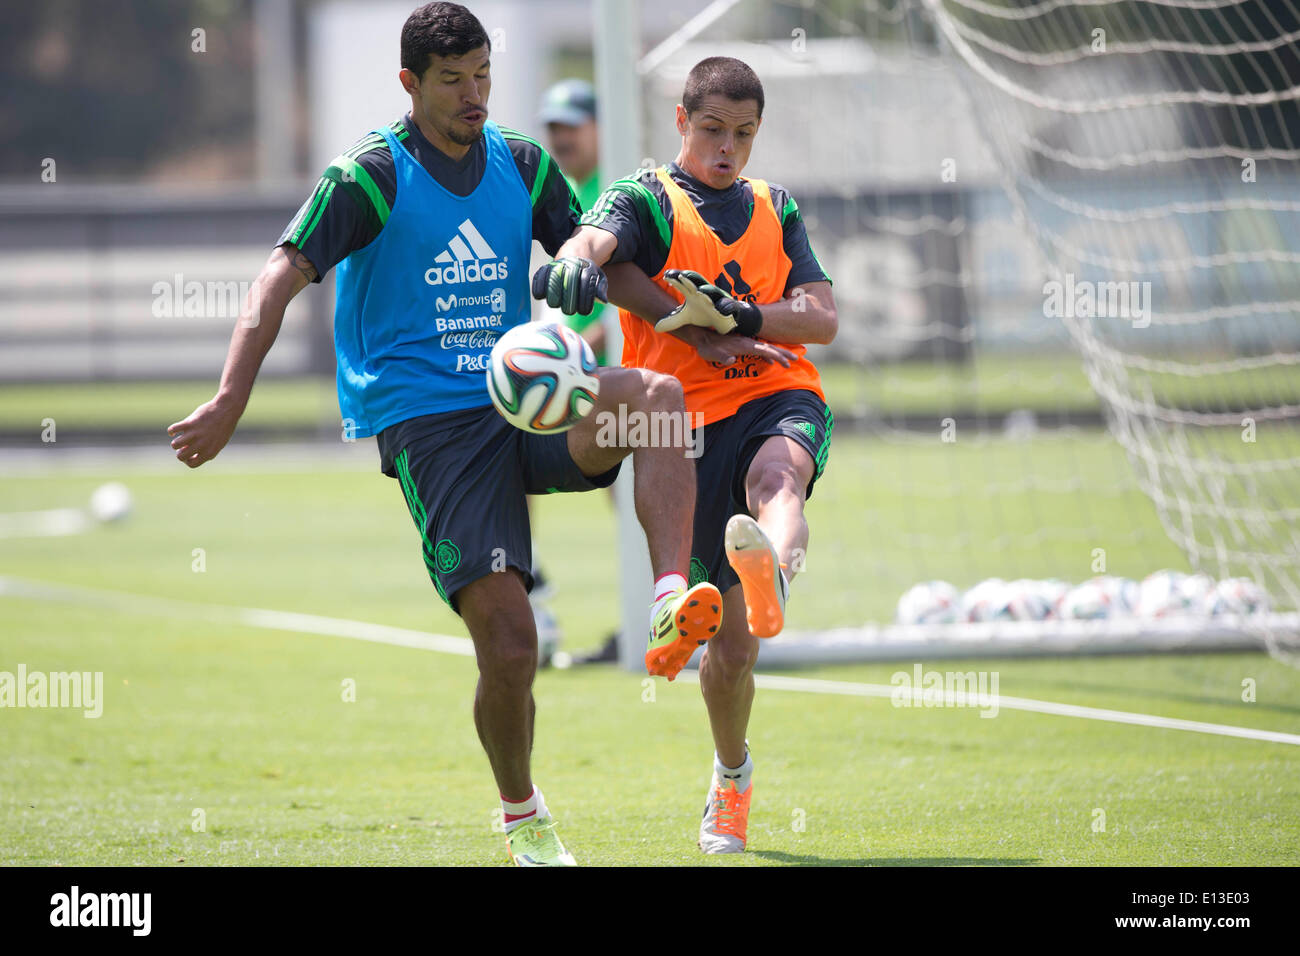 Mexico City. 21st May, 2014. Mexican National Team players Francisco Javier Rodriguez (L) and Javier Hernandez take part in a training session at the High Performance Center of the Mexican Soccer Federation in Mexico City, on May 21, 2014. Mexico will have a friendly match with Israel on May 28 before the FIFA World Cup. © Sandra Perdomo/Xinhua/Alamy Live News Stock Photo